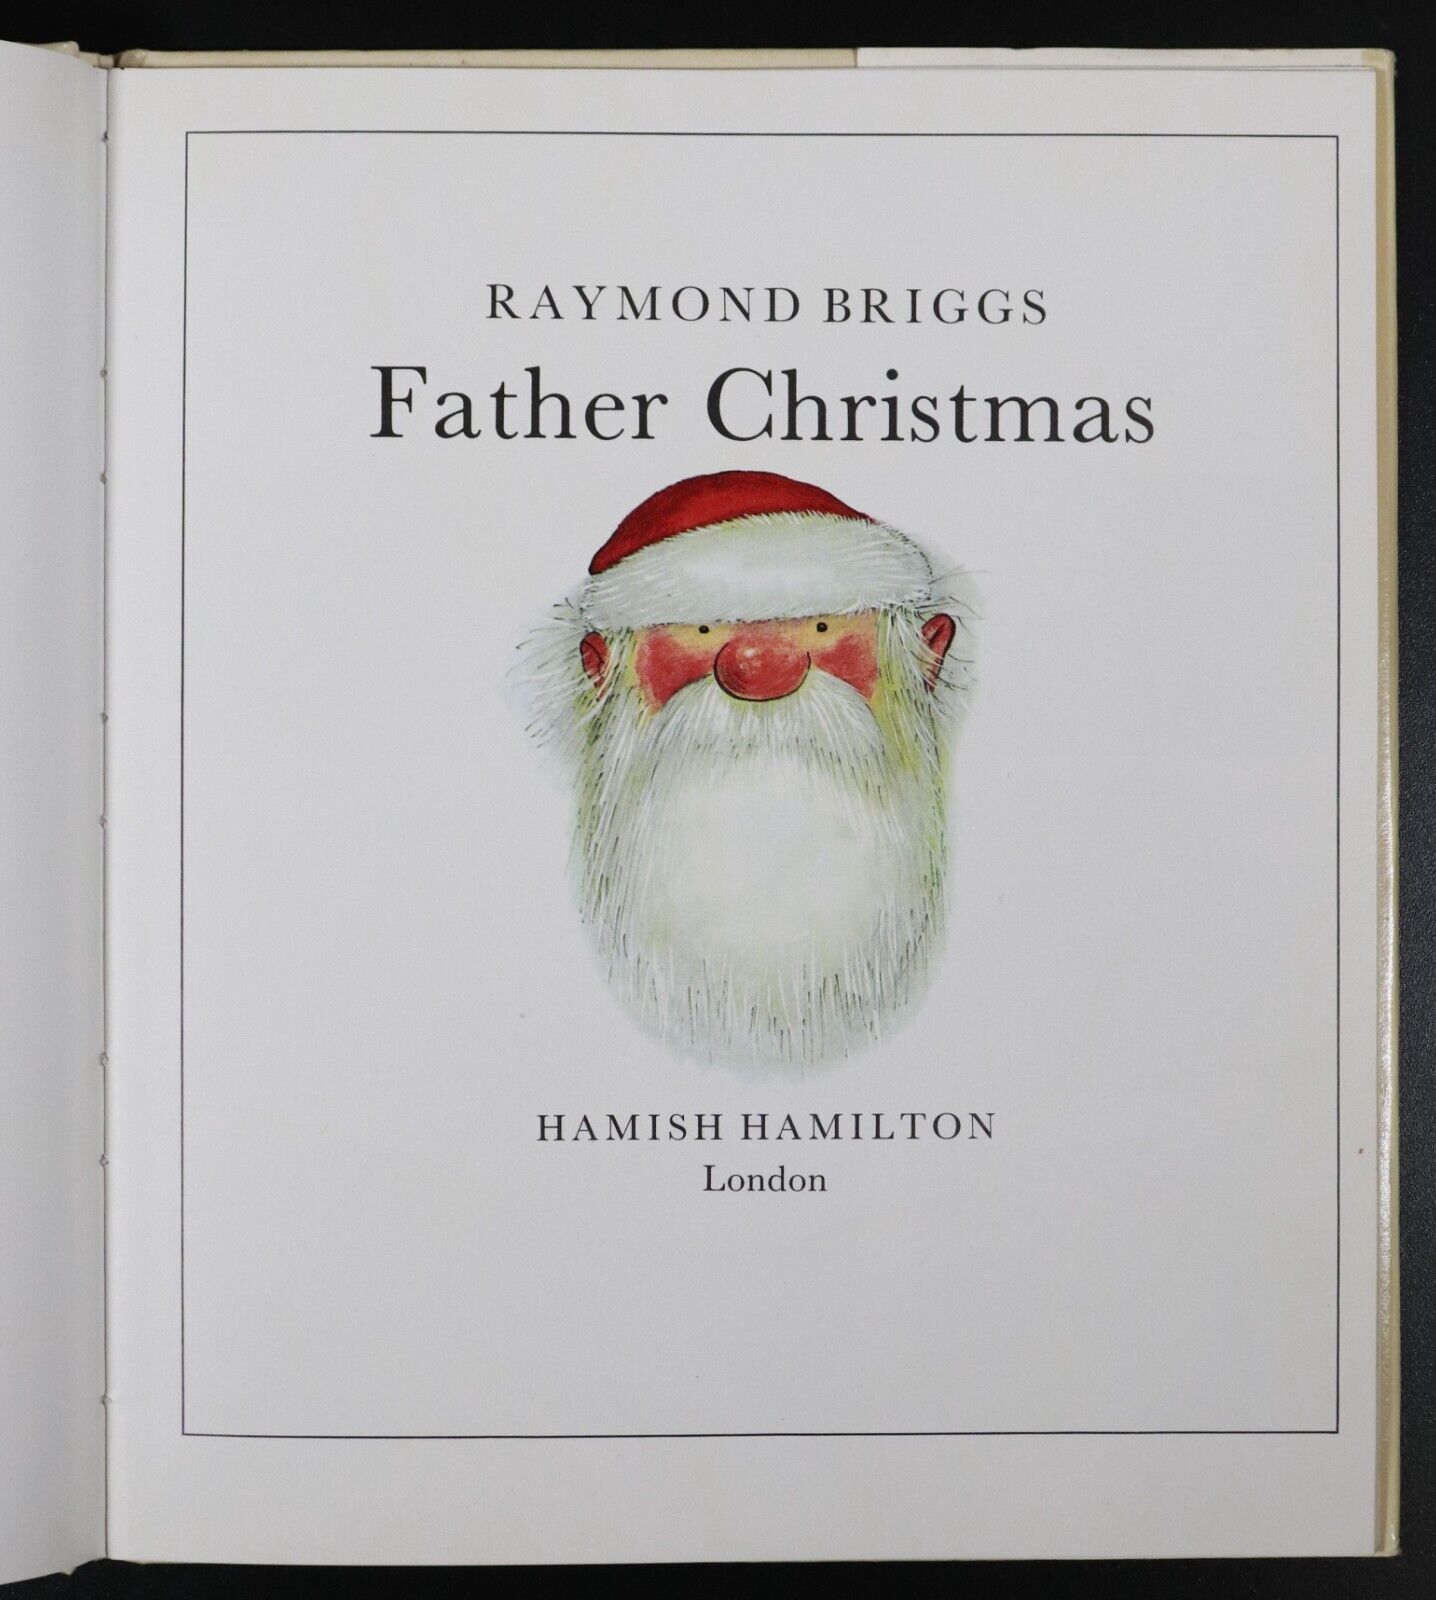 1973 Father Christmas by Raymond Briggs Vintage Childrens Book 1st Ed 2nd Print